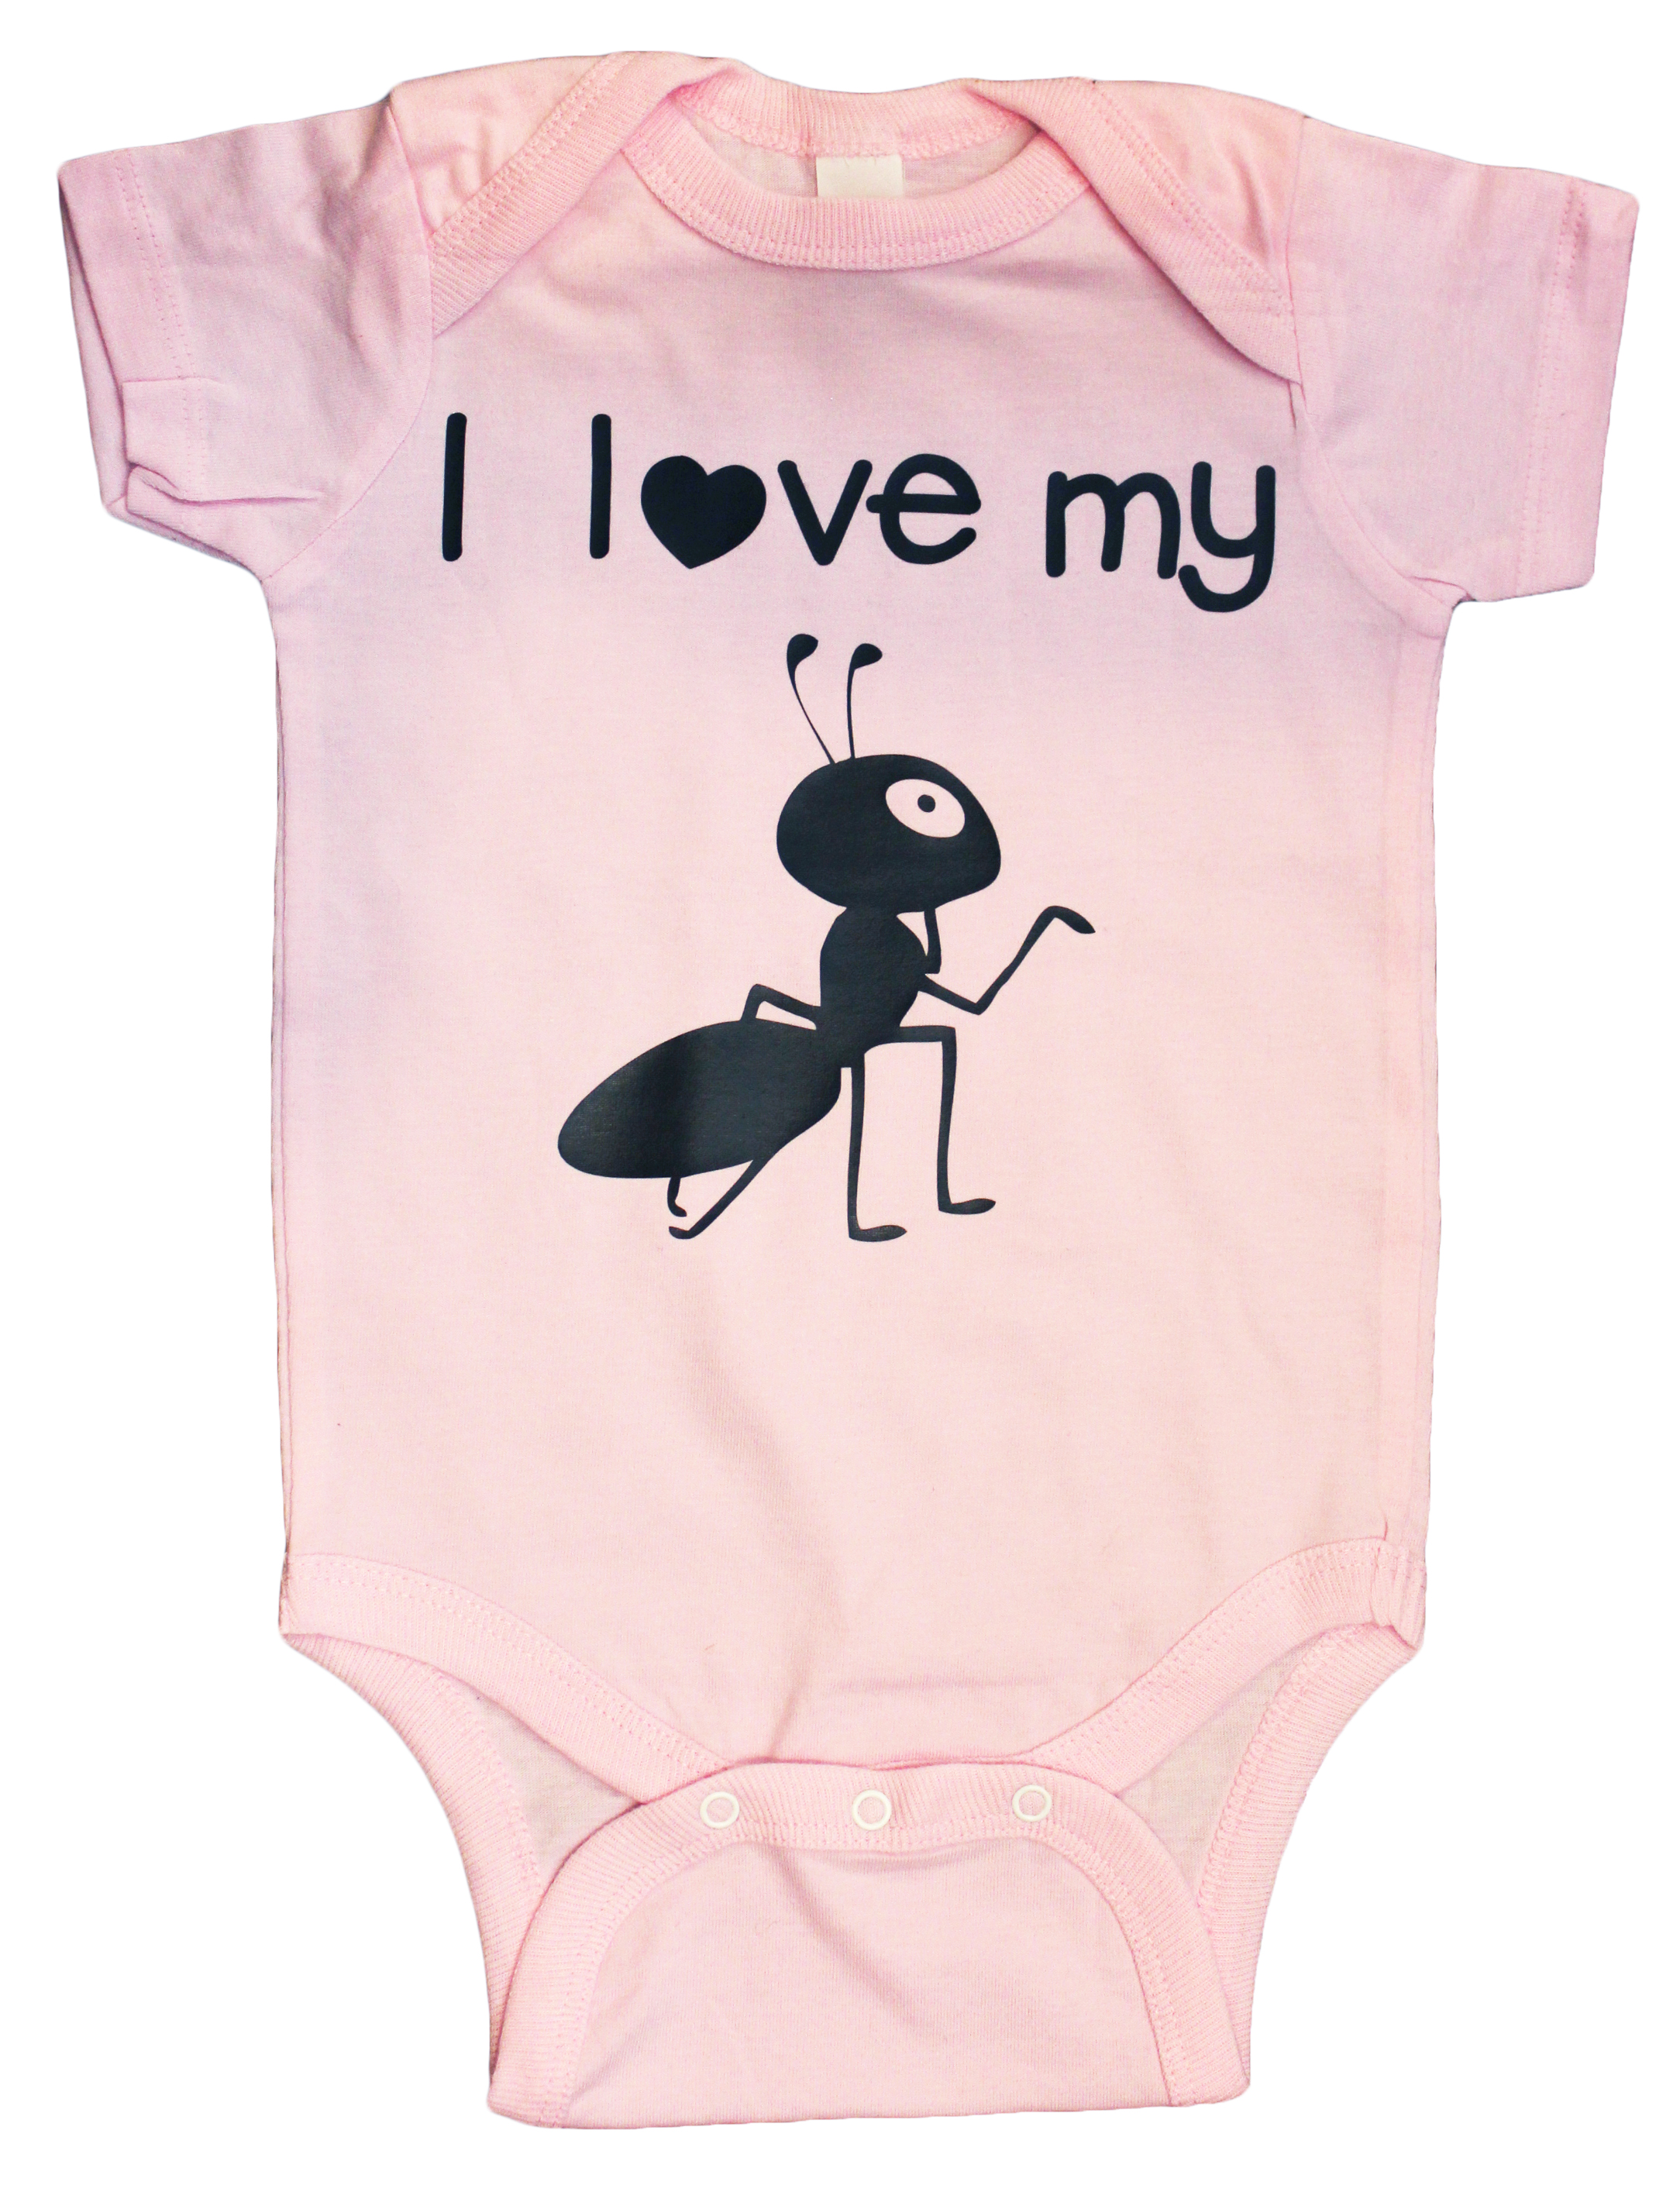 baby clothes outlet online